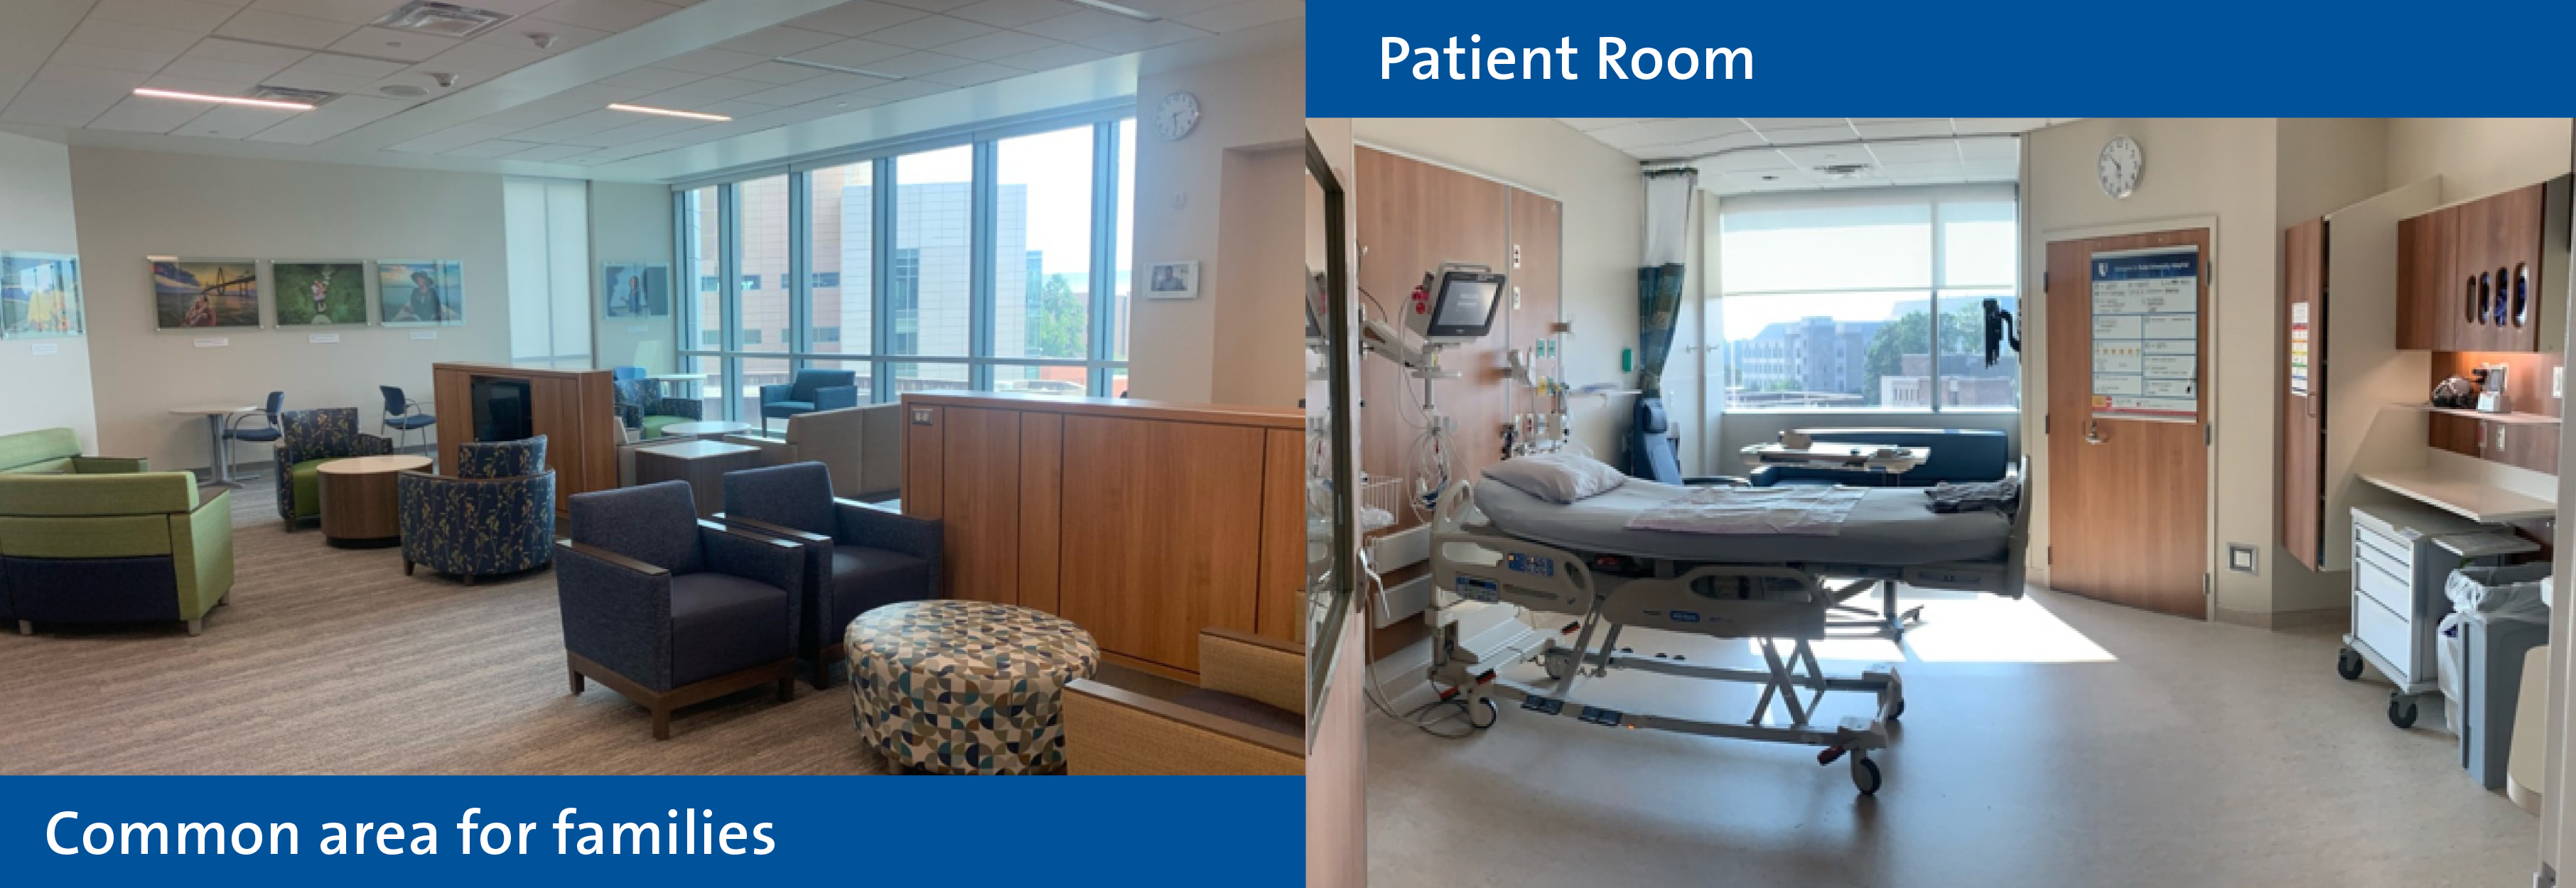 Patient room and common area for families